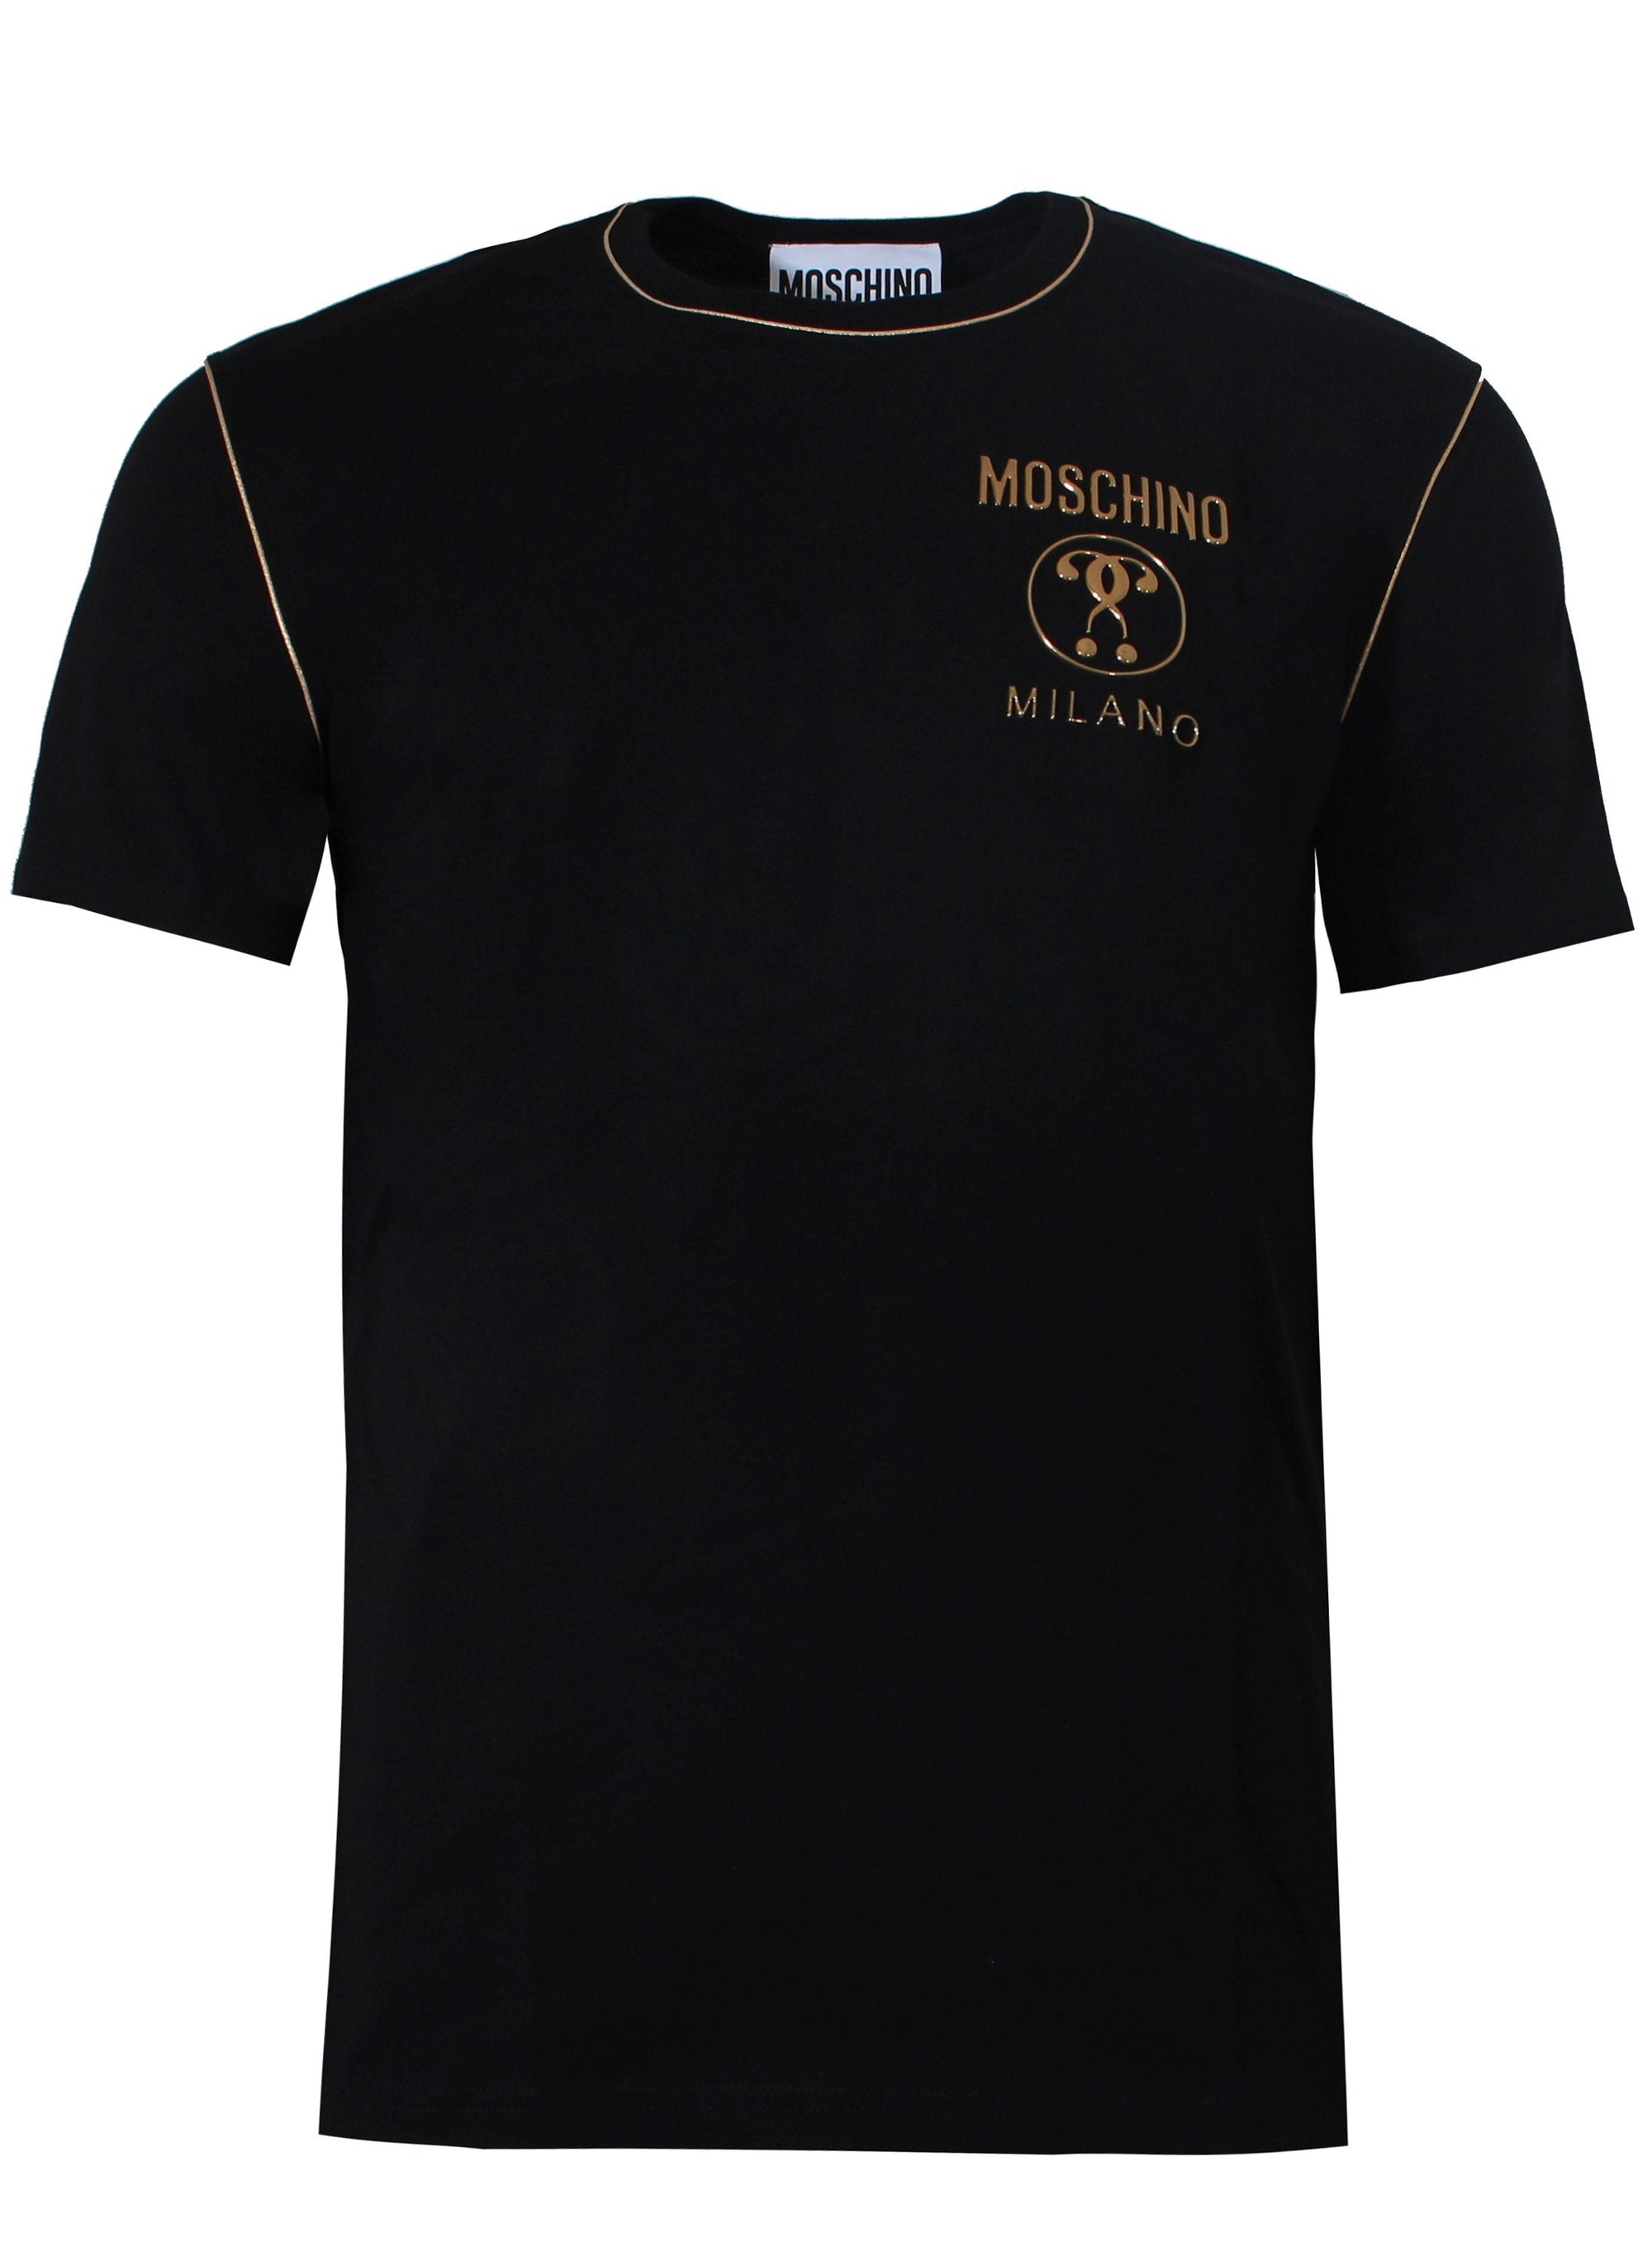 Logo Black and Gold Tee